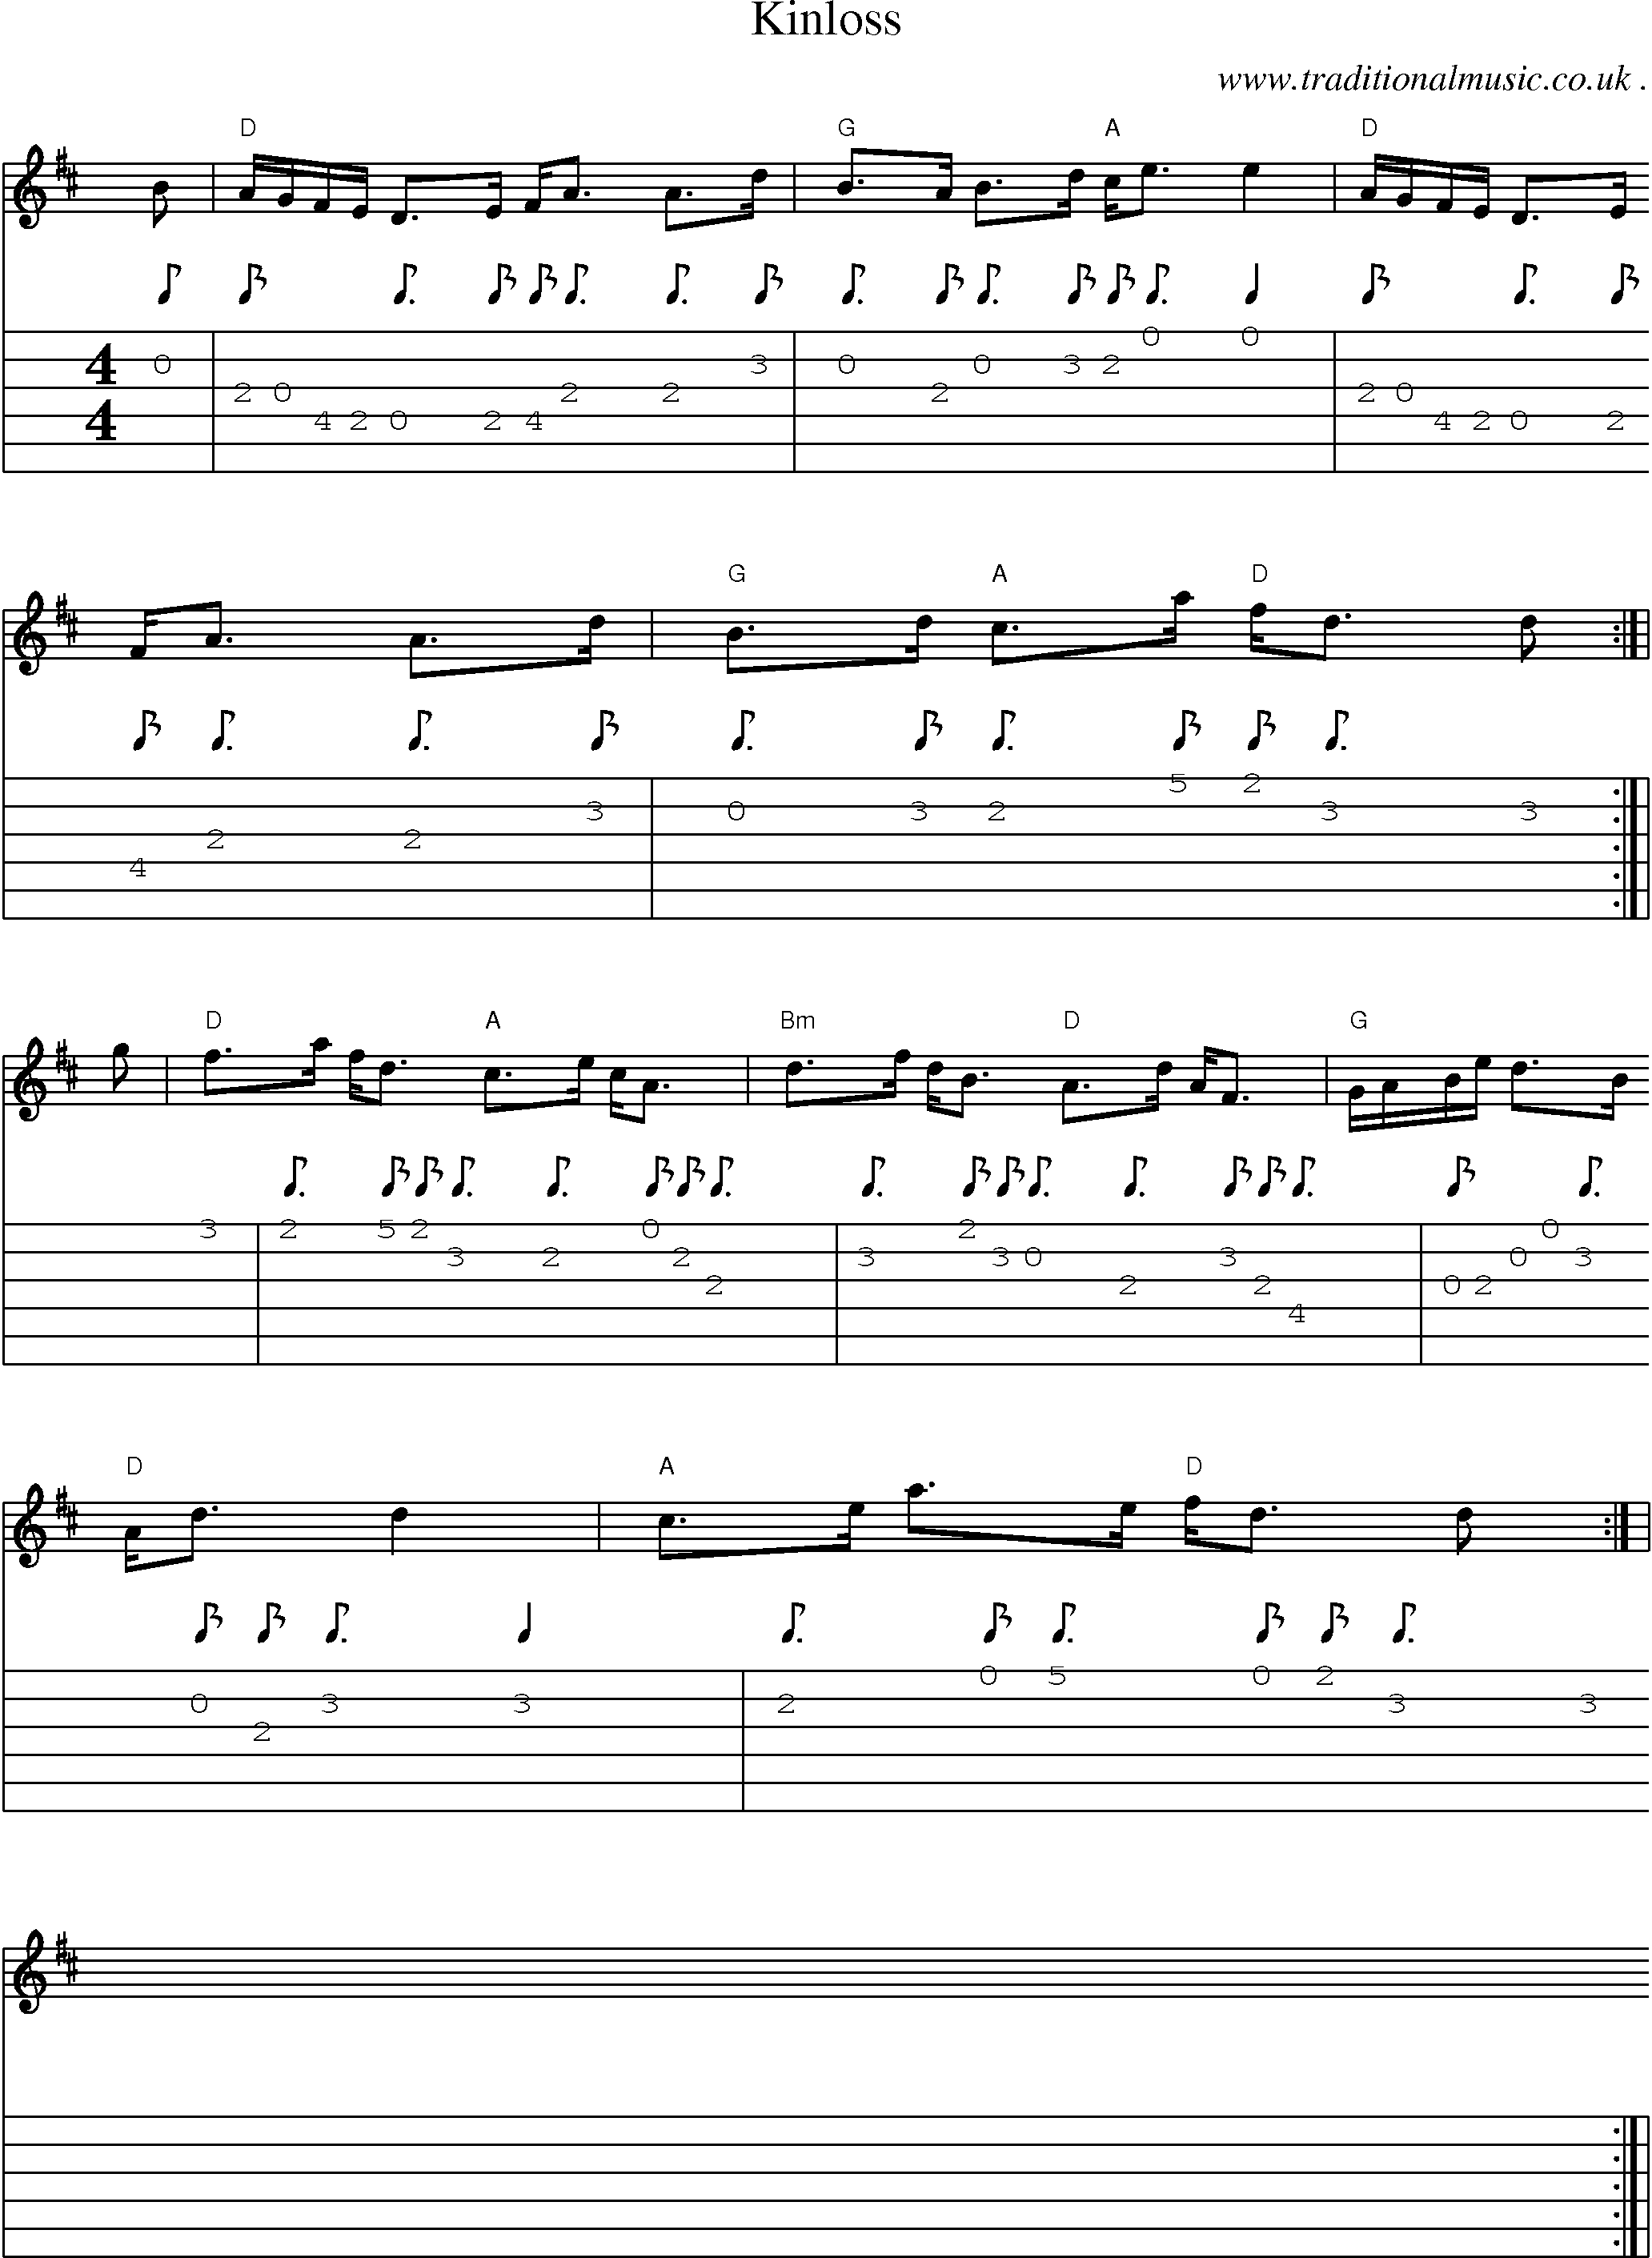 Sheet-music  score, Chords and Guitar Tabs for Kinloss